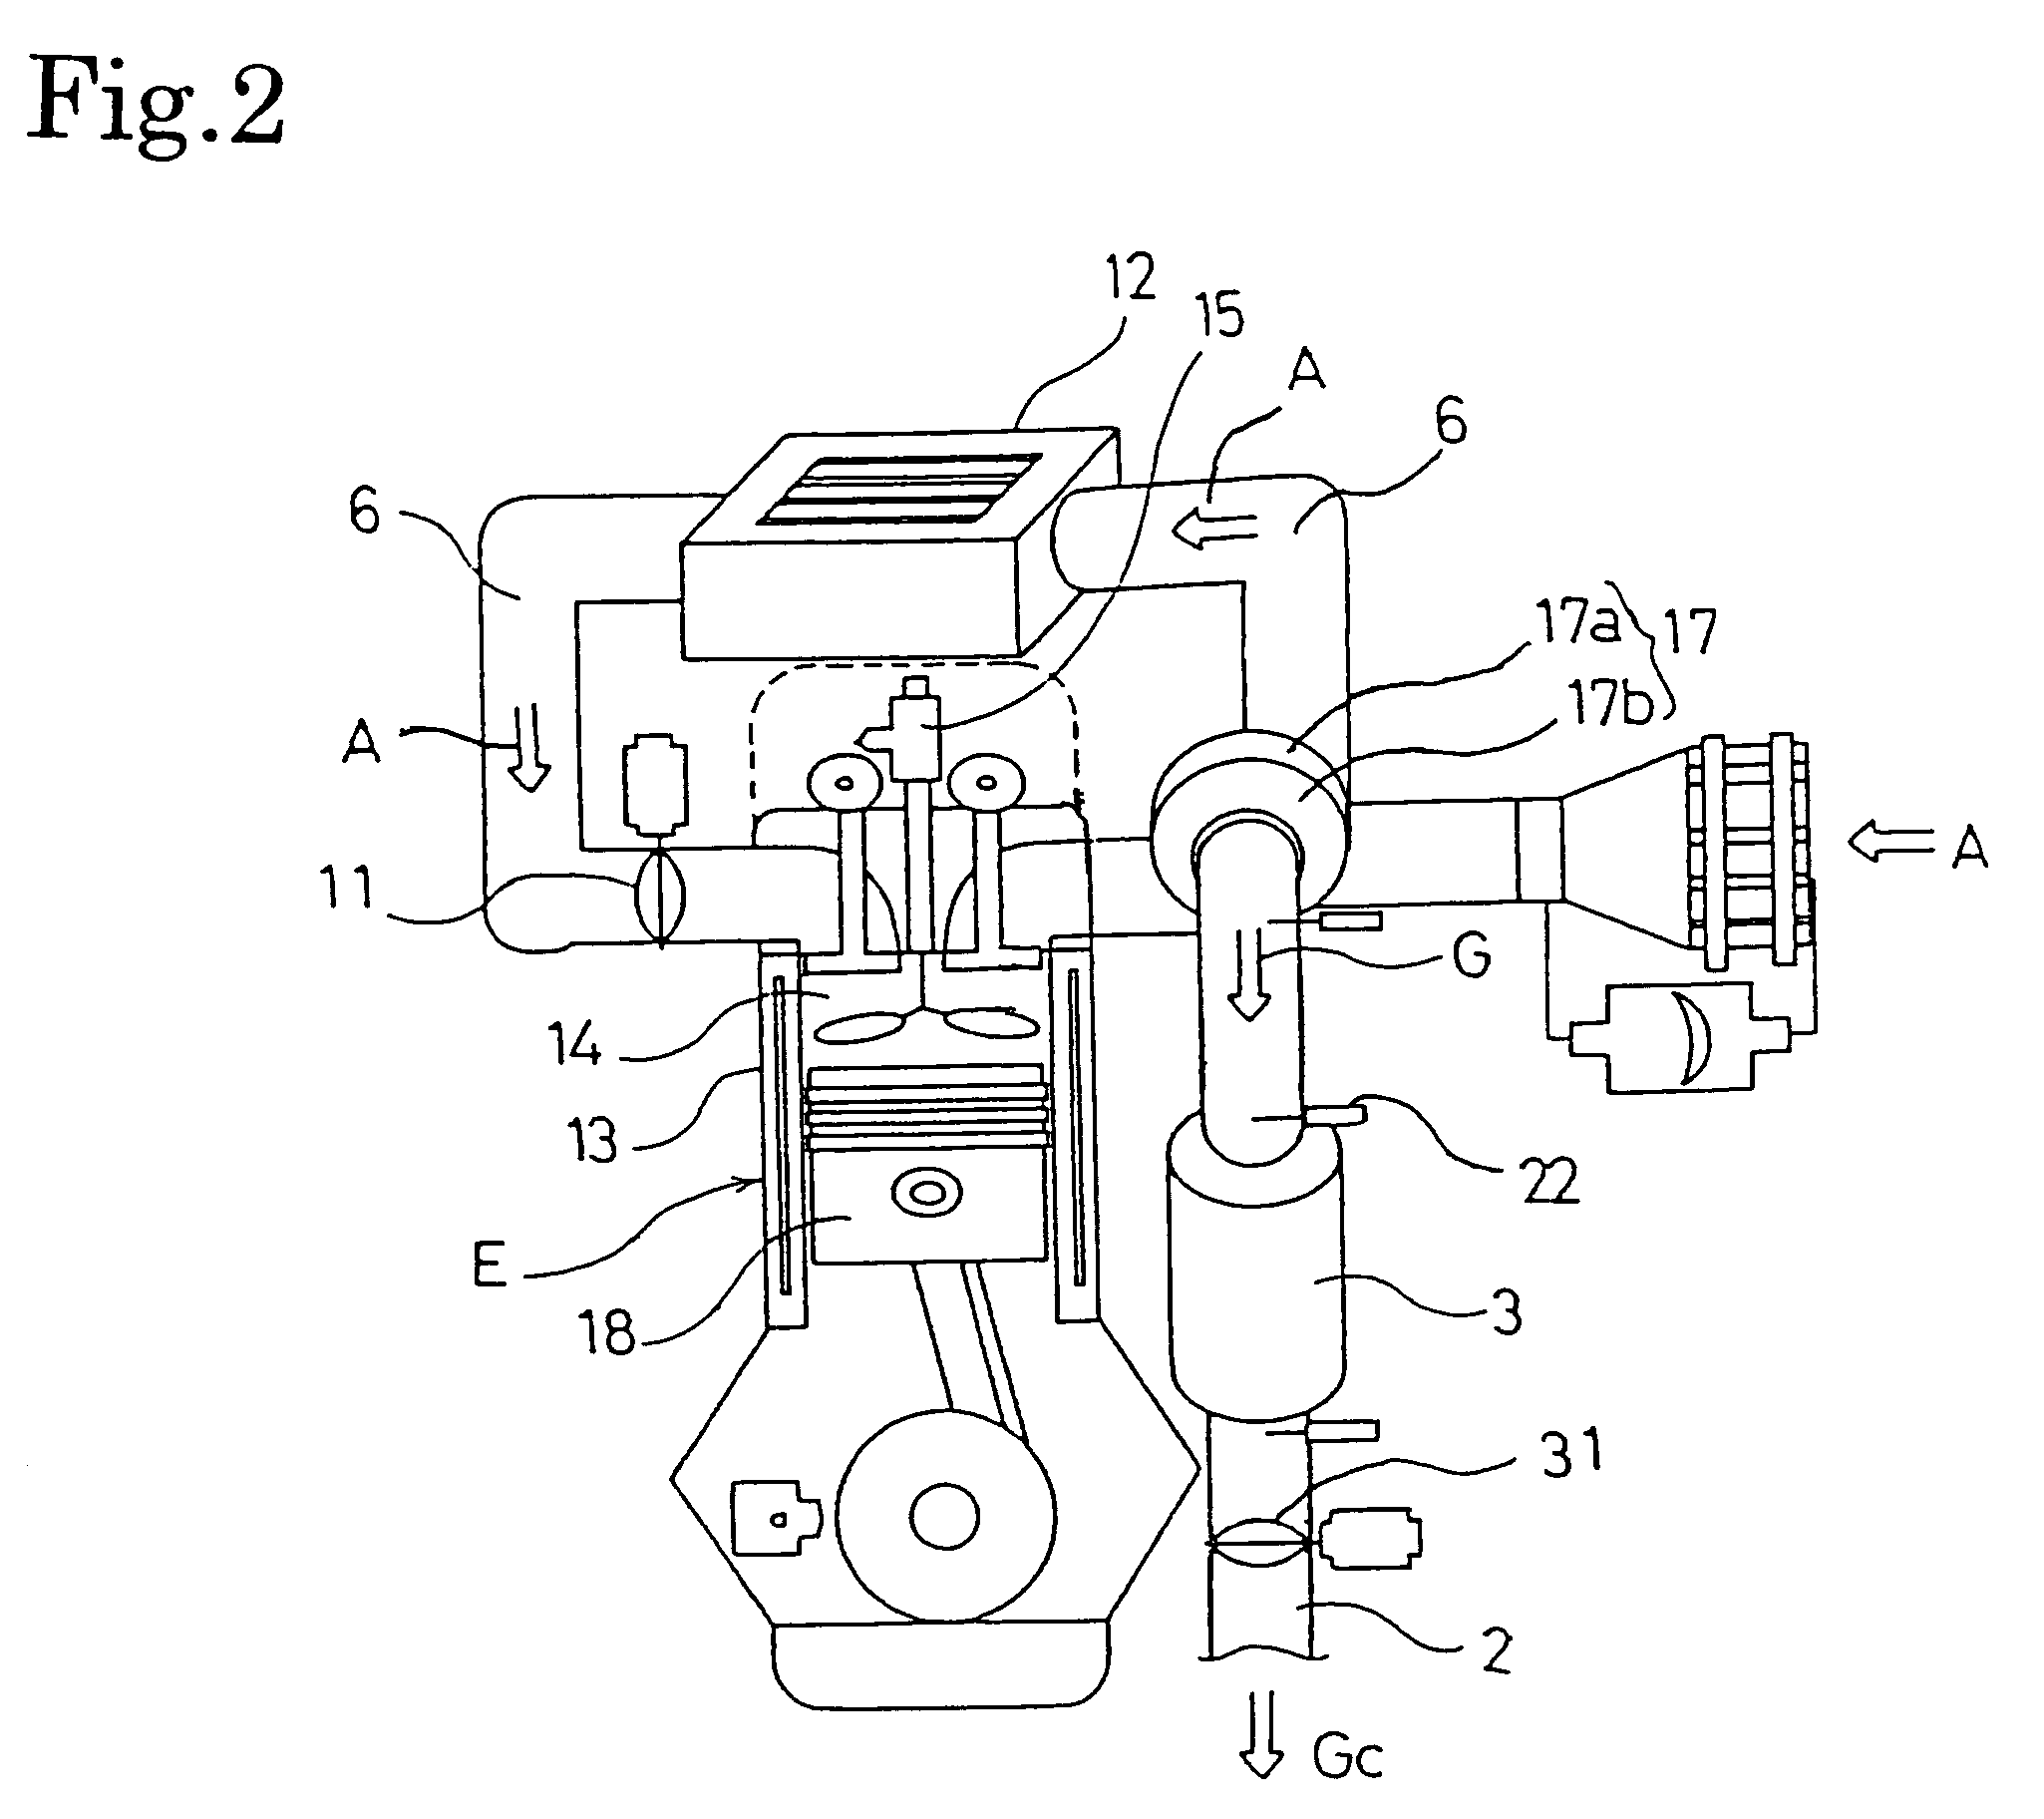 Exhaust gas purifying system